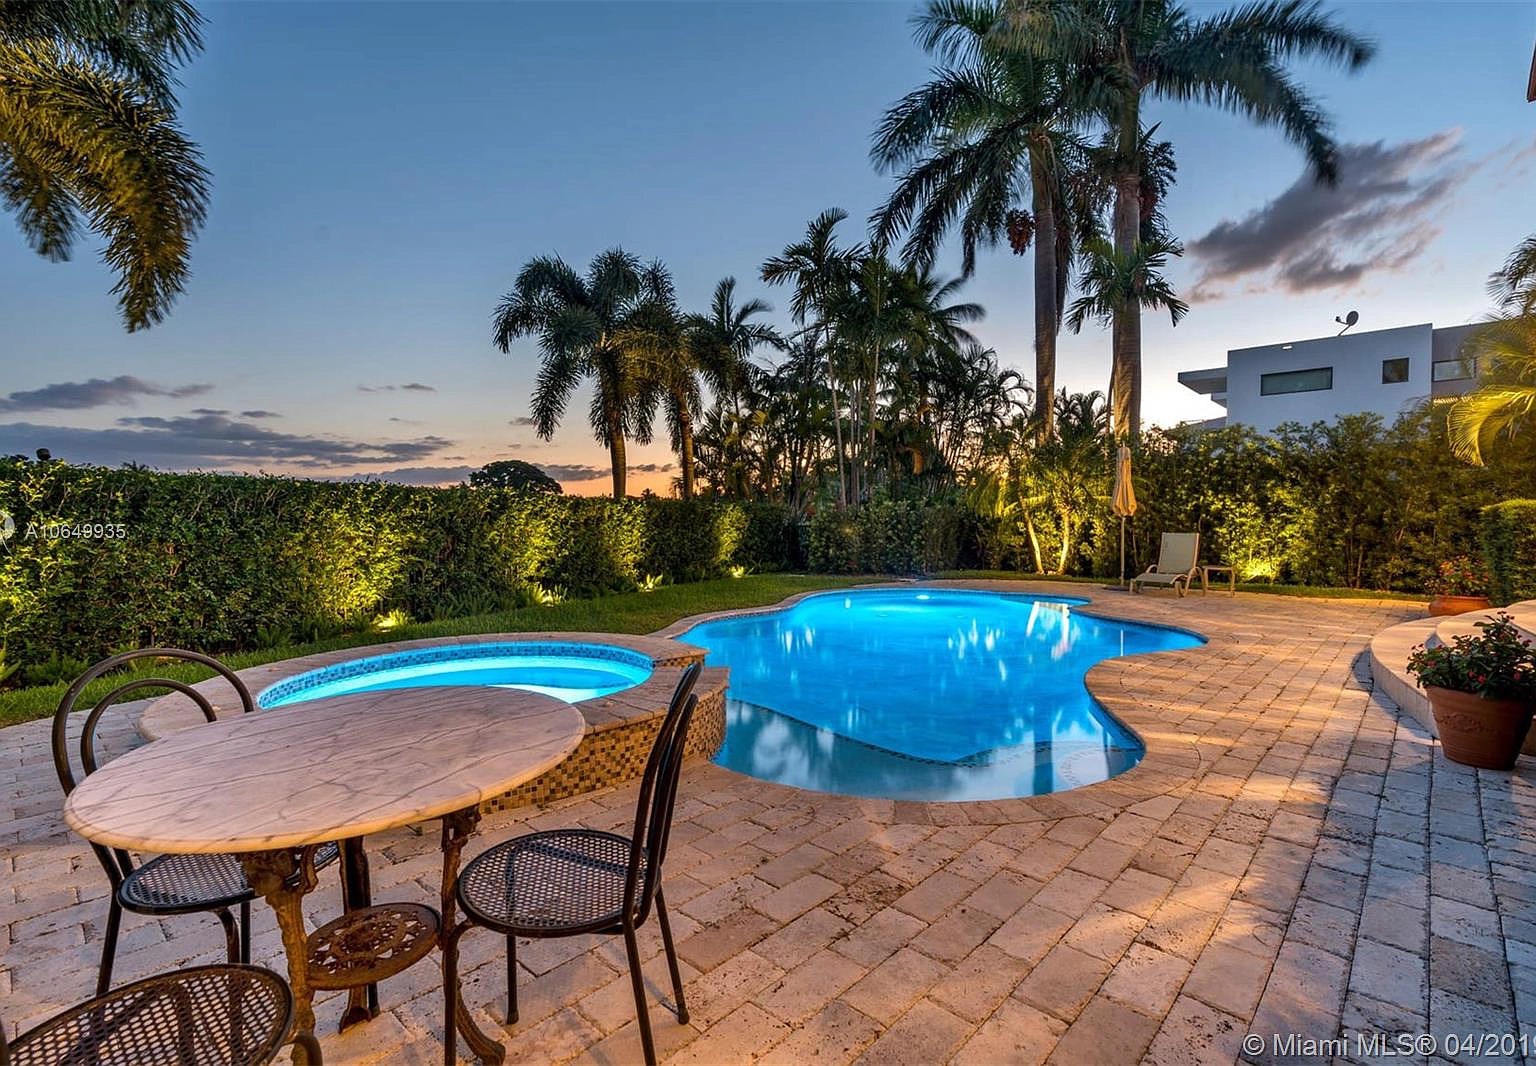 430 W 62nd St, Miami Beach, FL 33140 - $3,975,000 home for sale, house images, photos and pics gallery